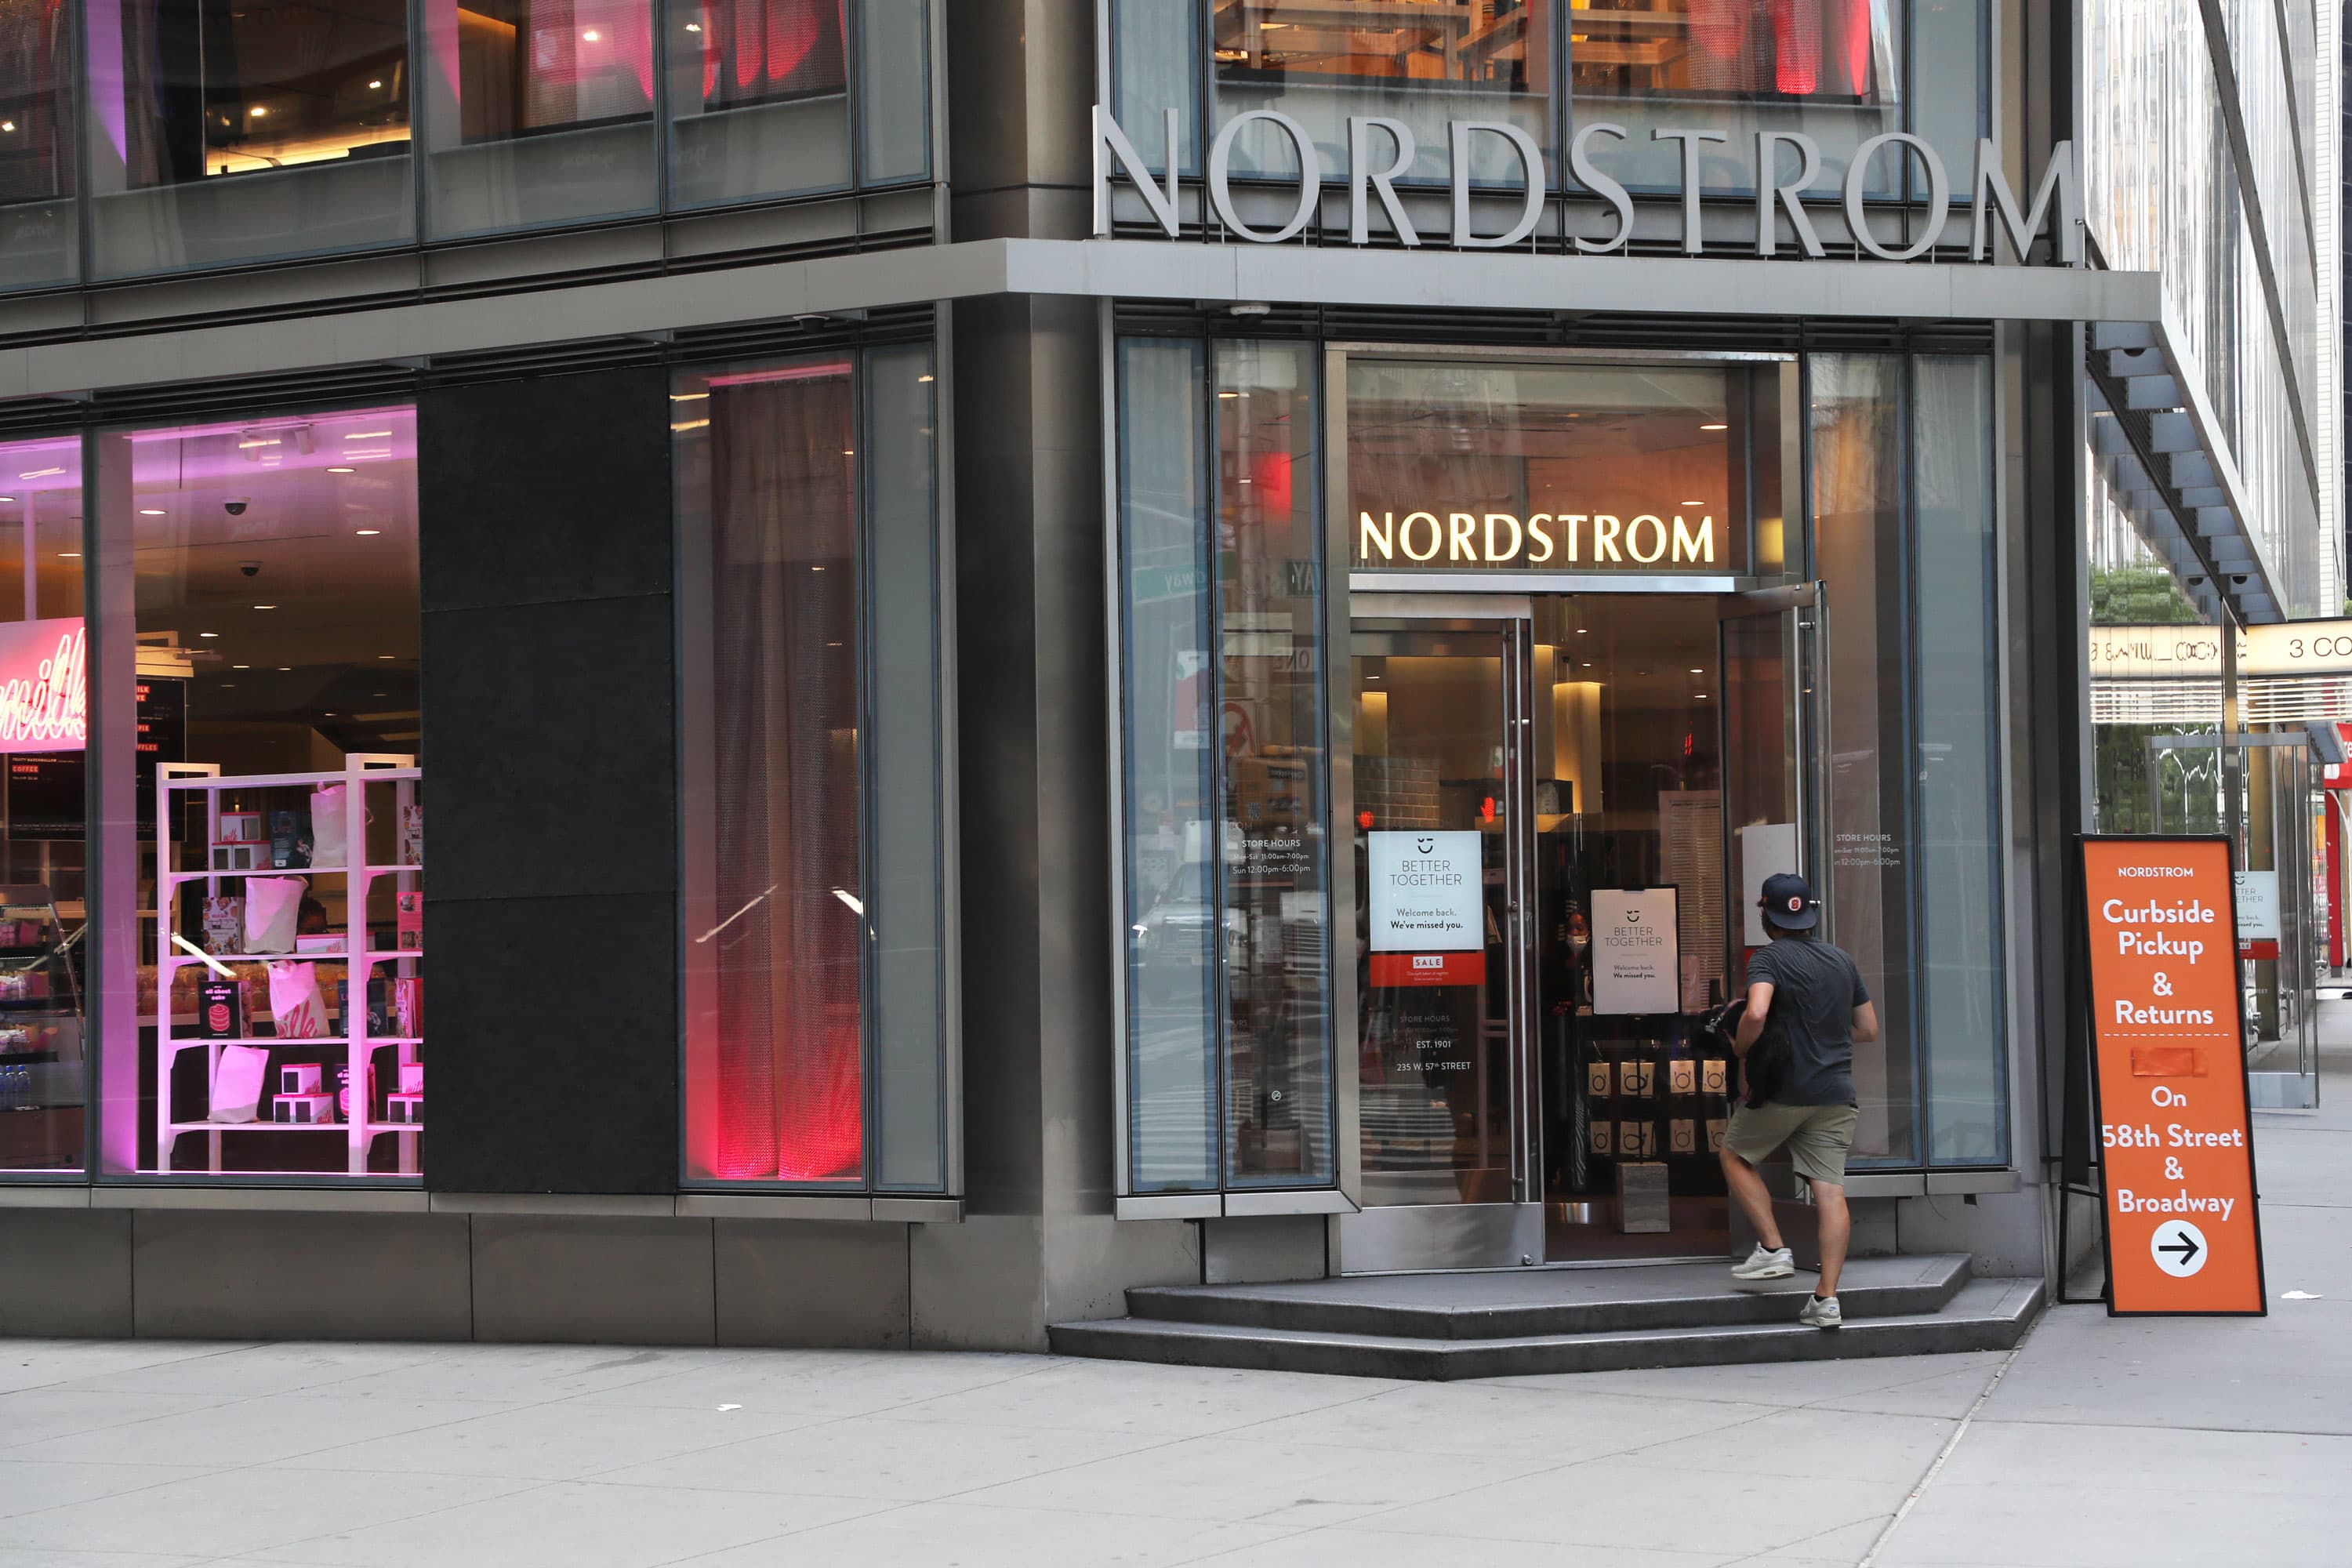 Nordstrom (JWN) shares fell as the retailer said holiday sales were down 22%